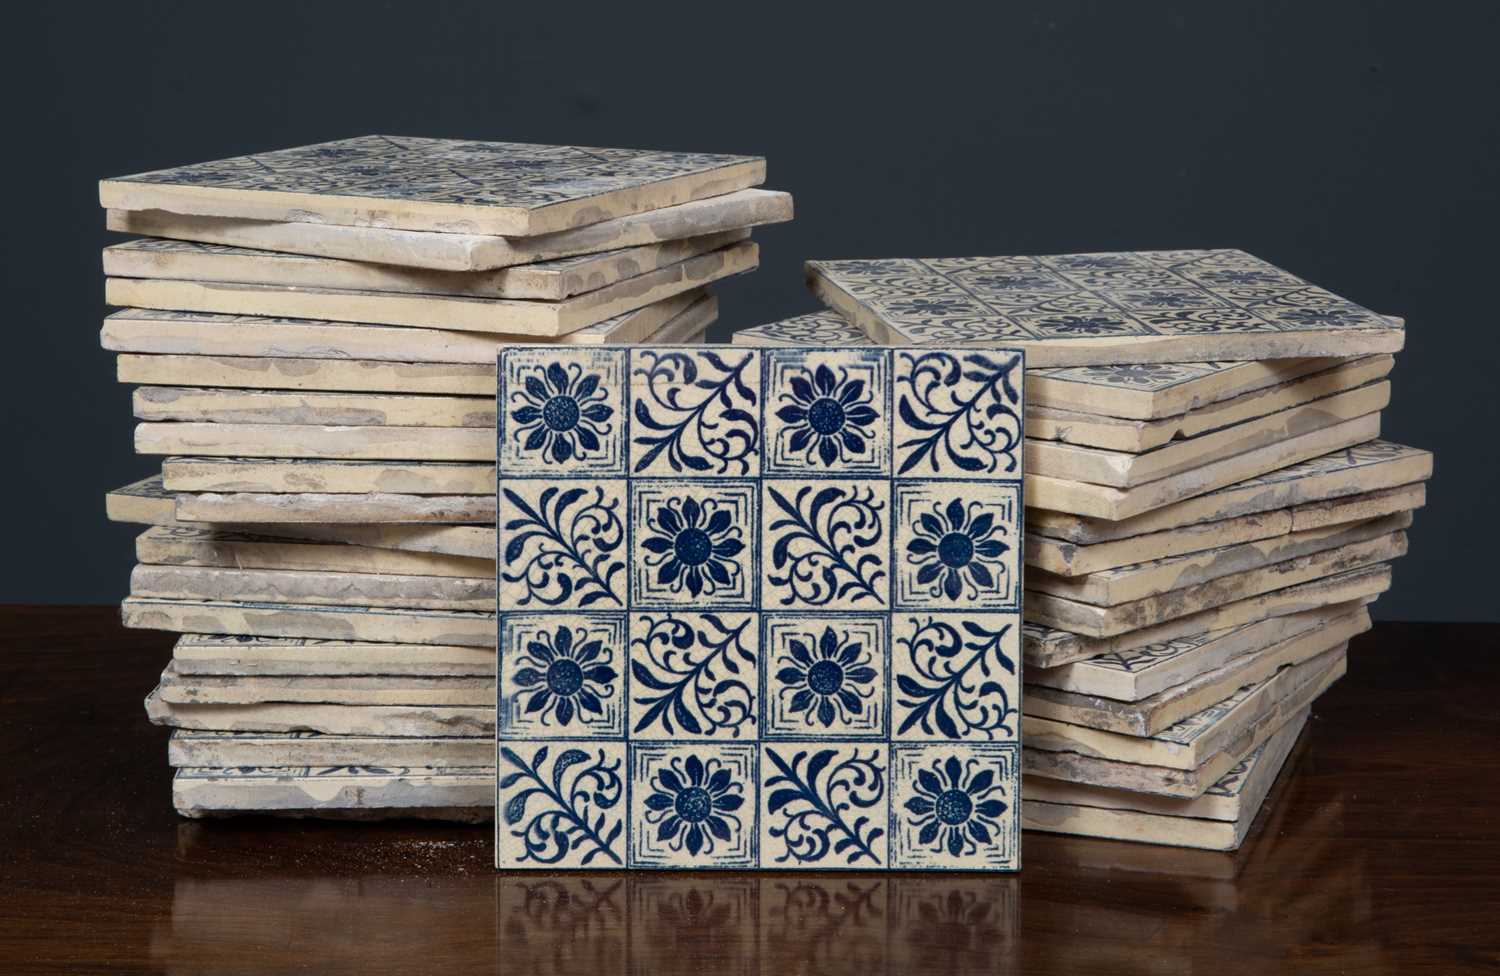 A box of approximately forty-five Victorian Maw & Co. tiles, Floreat Salopia with blue and white